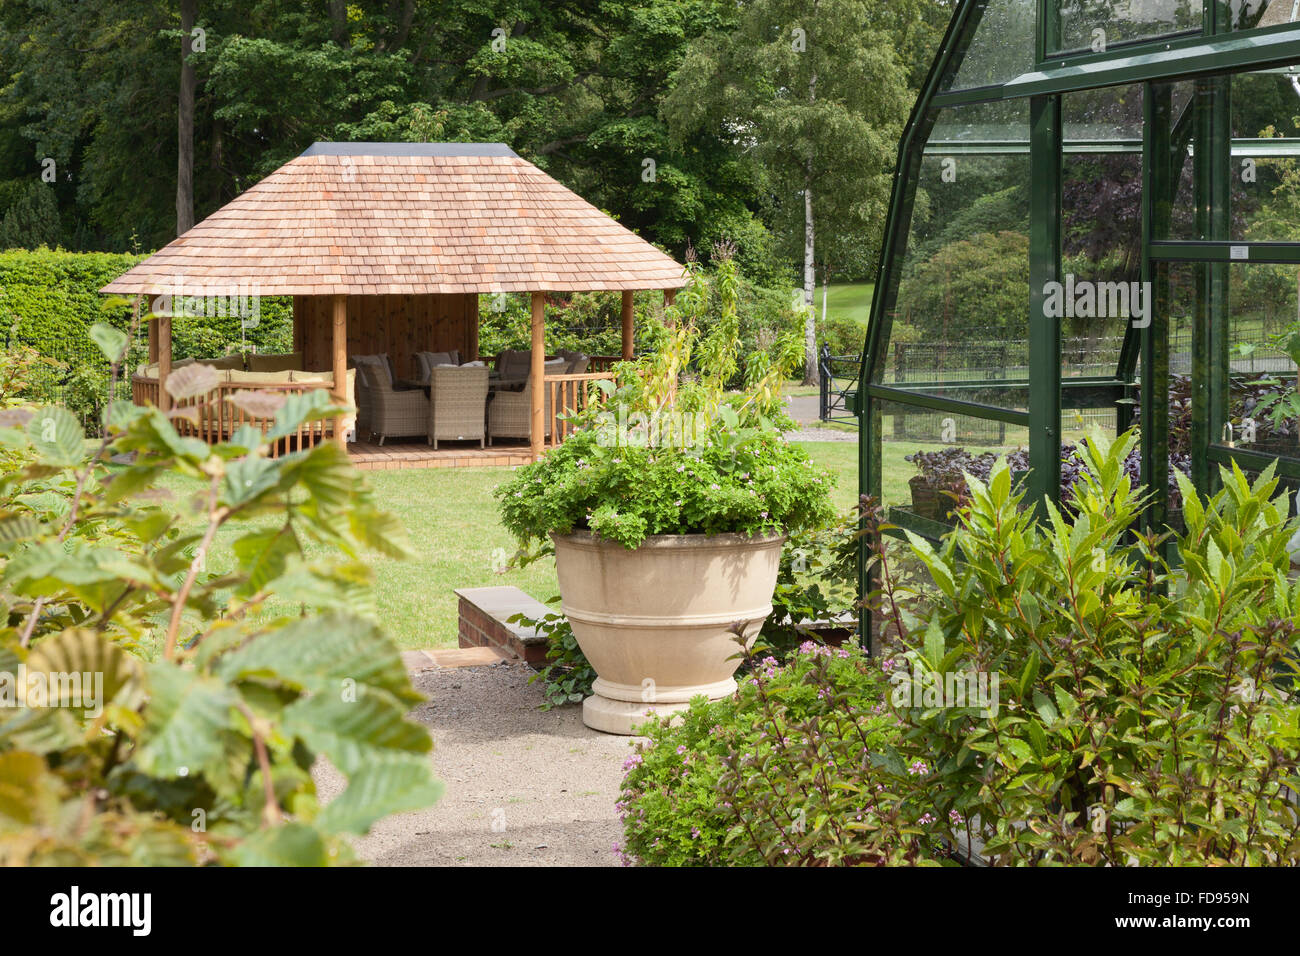 The Breeze House. The Kitchen Garden at Rudding Park, North Yorkshire, UK. Summer, July 2015. Stock Photo